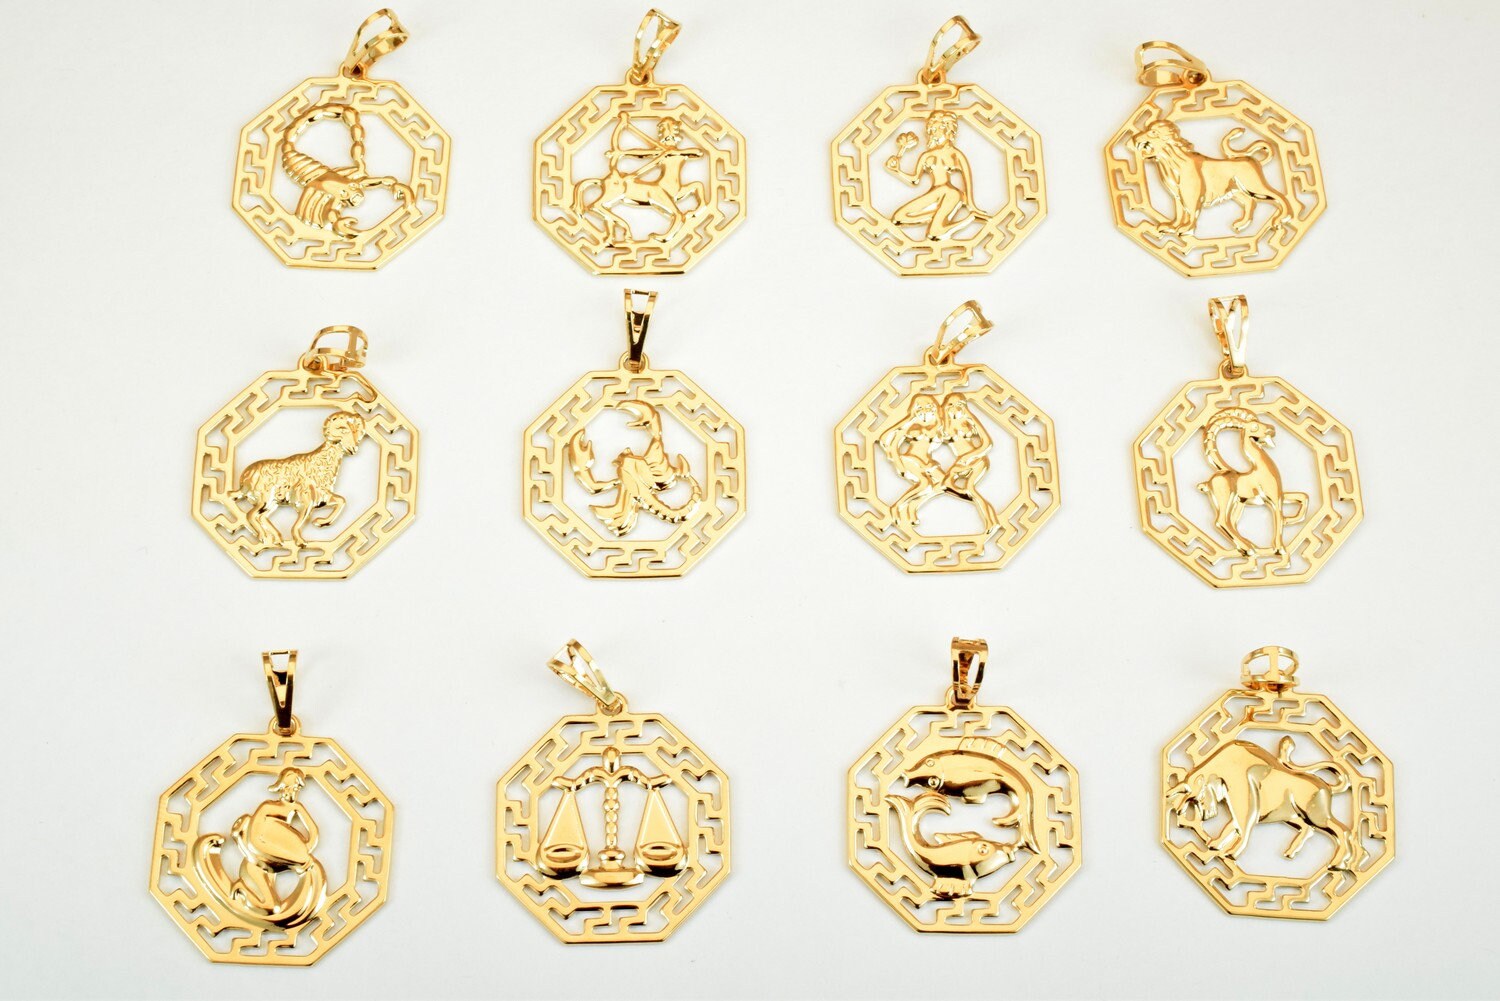 Zodiac Charm Pendants Horoscope Charms Horoscope Pendant Pinky Gold Filled Size 27.5x25mm Zodiac Coin Constellation Charm For Jewelry Making